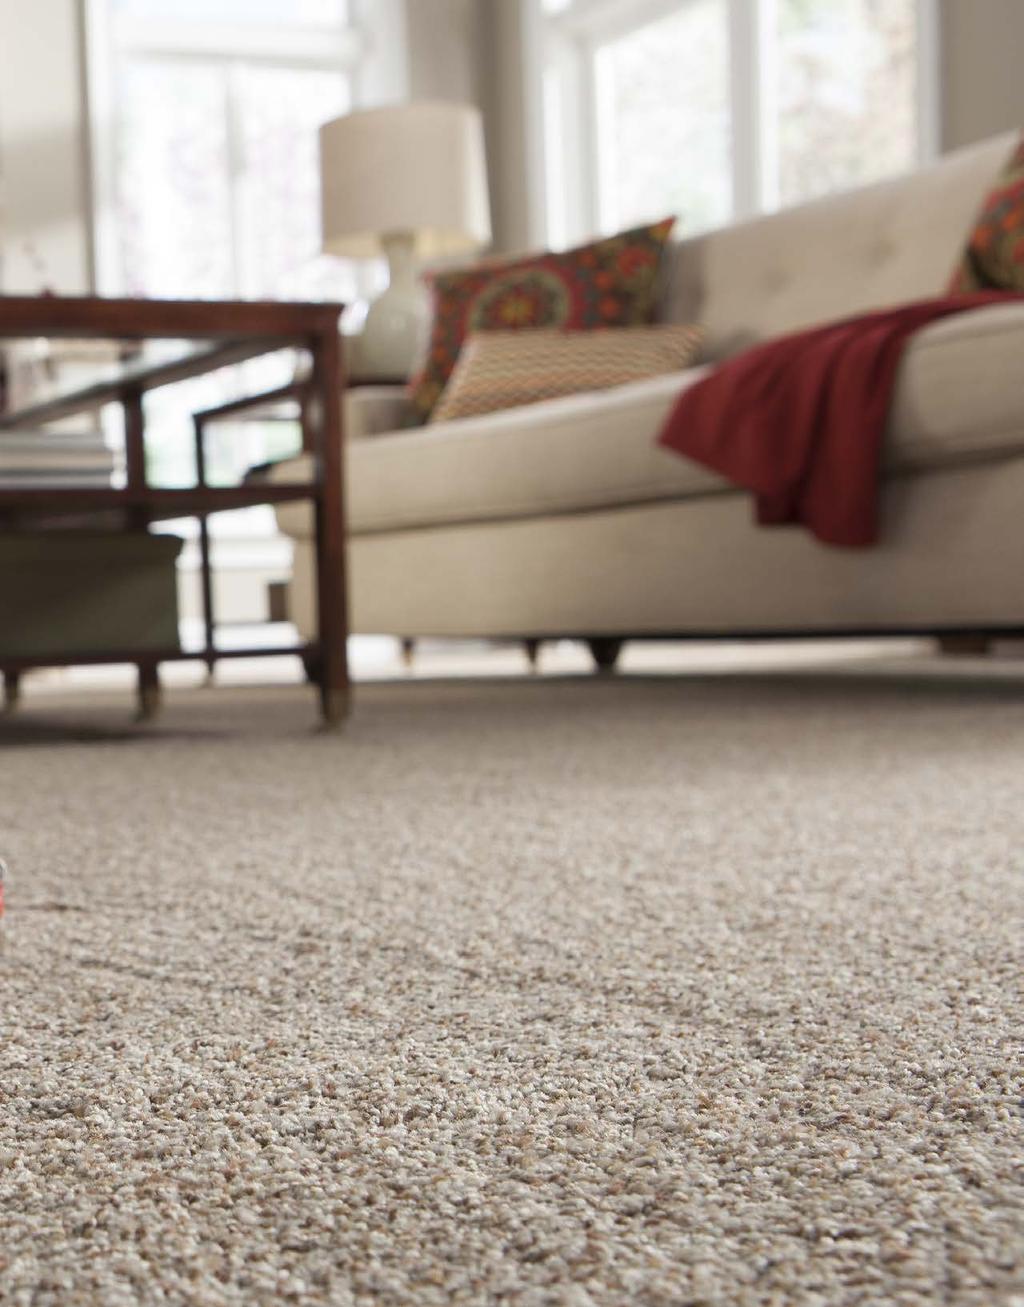 Durability is in the fibre s DNA Carpet adds beautiful warmth and comfort to a room like no other flooring.